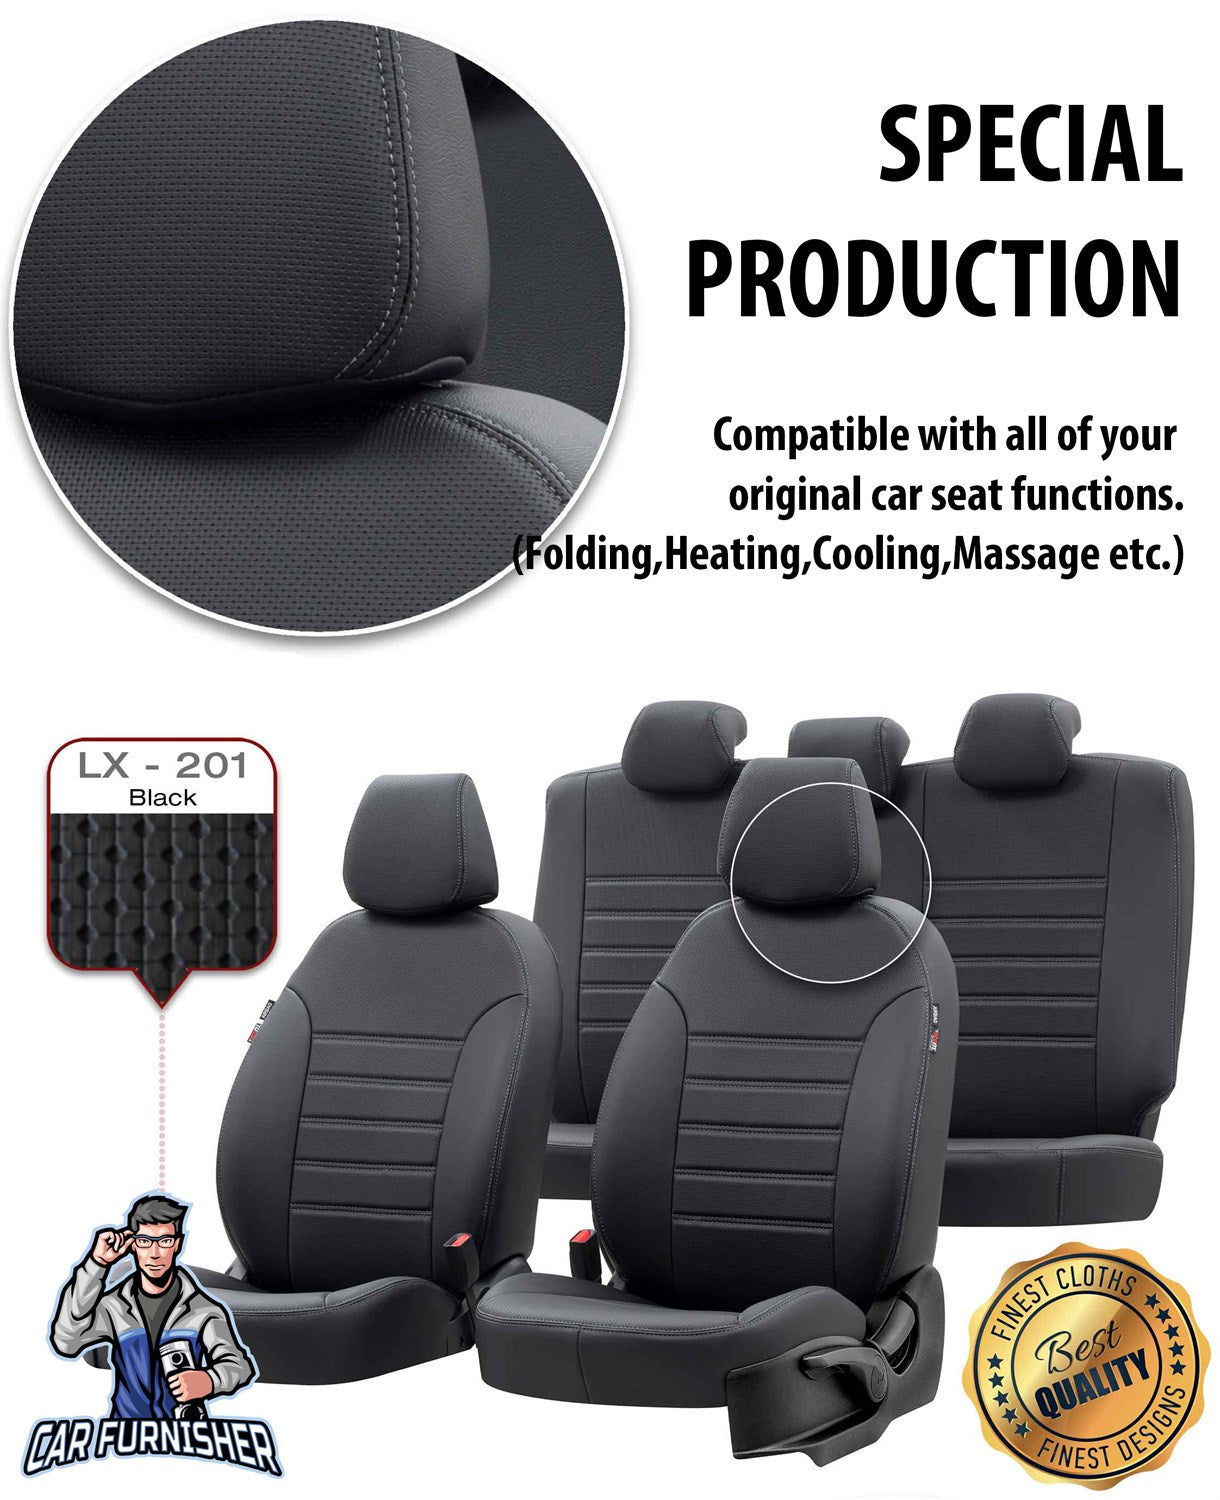 Nissan Primera Seat Covers New York Leather Design Smoked Leather